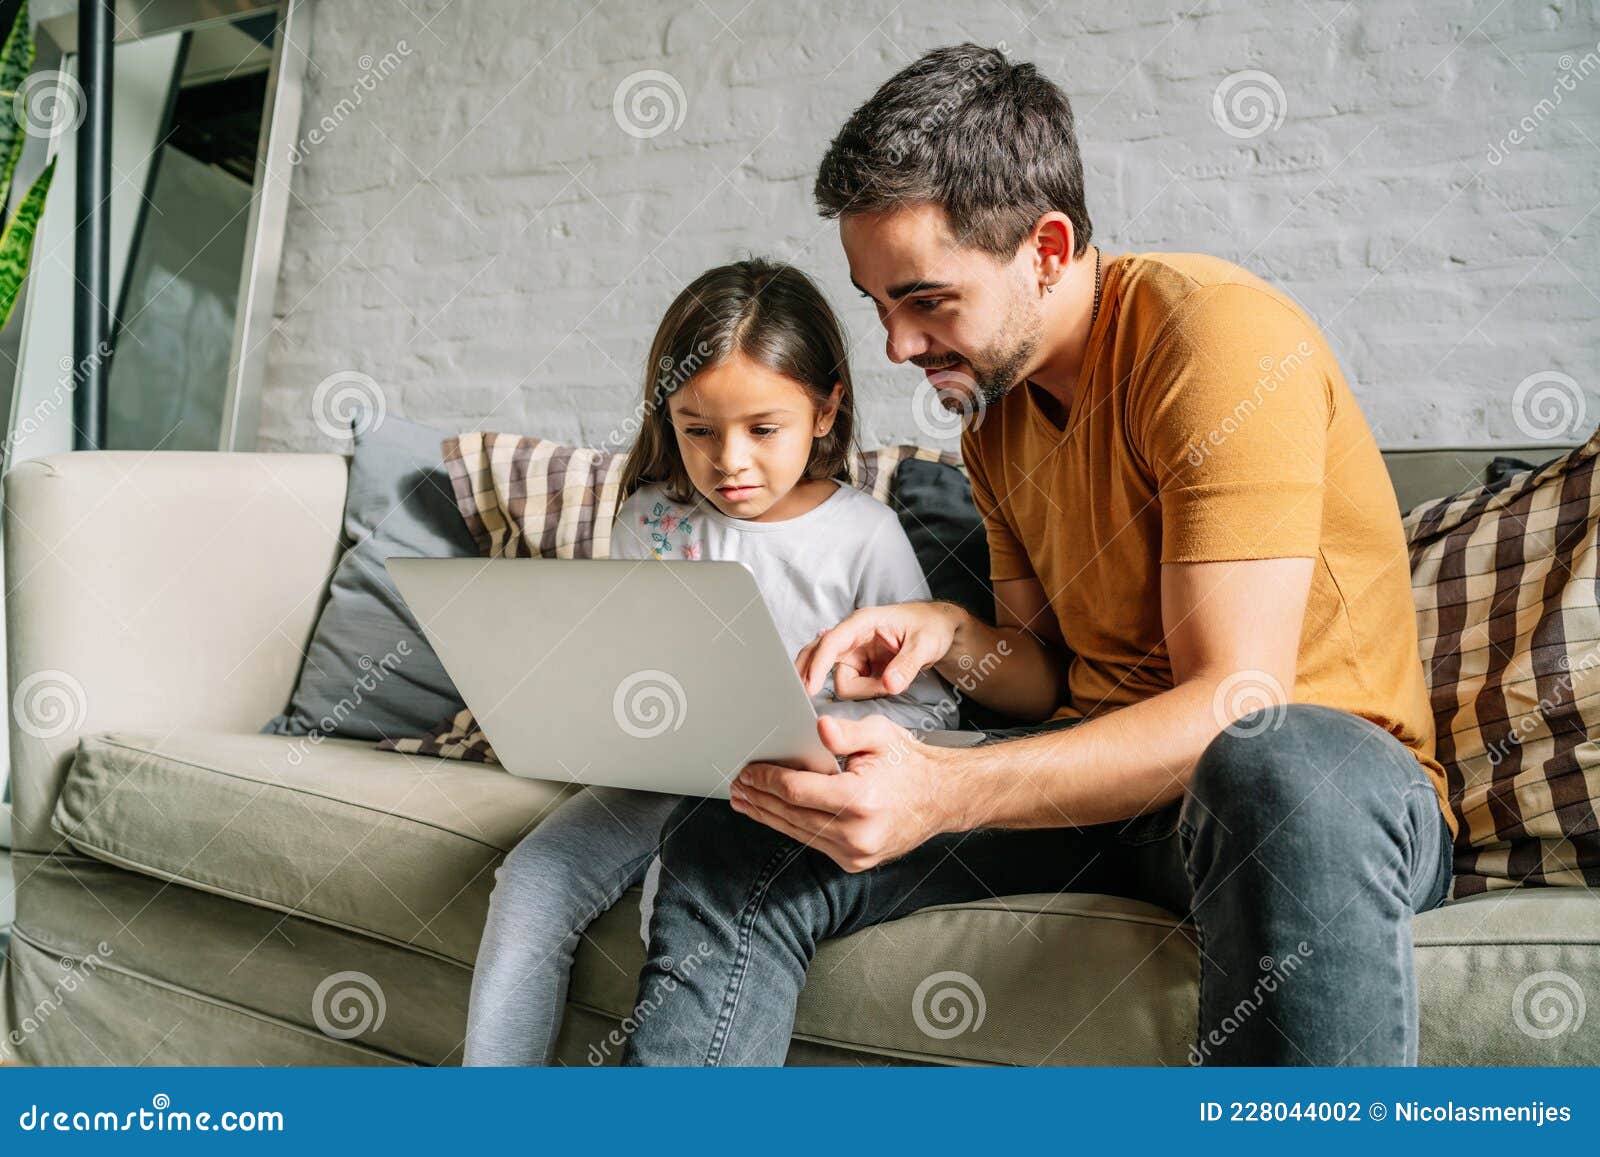 little girl and her father using a laptop together at home.